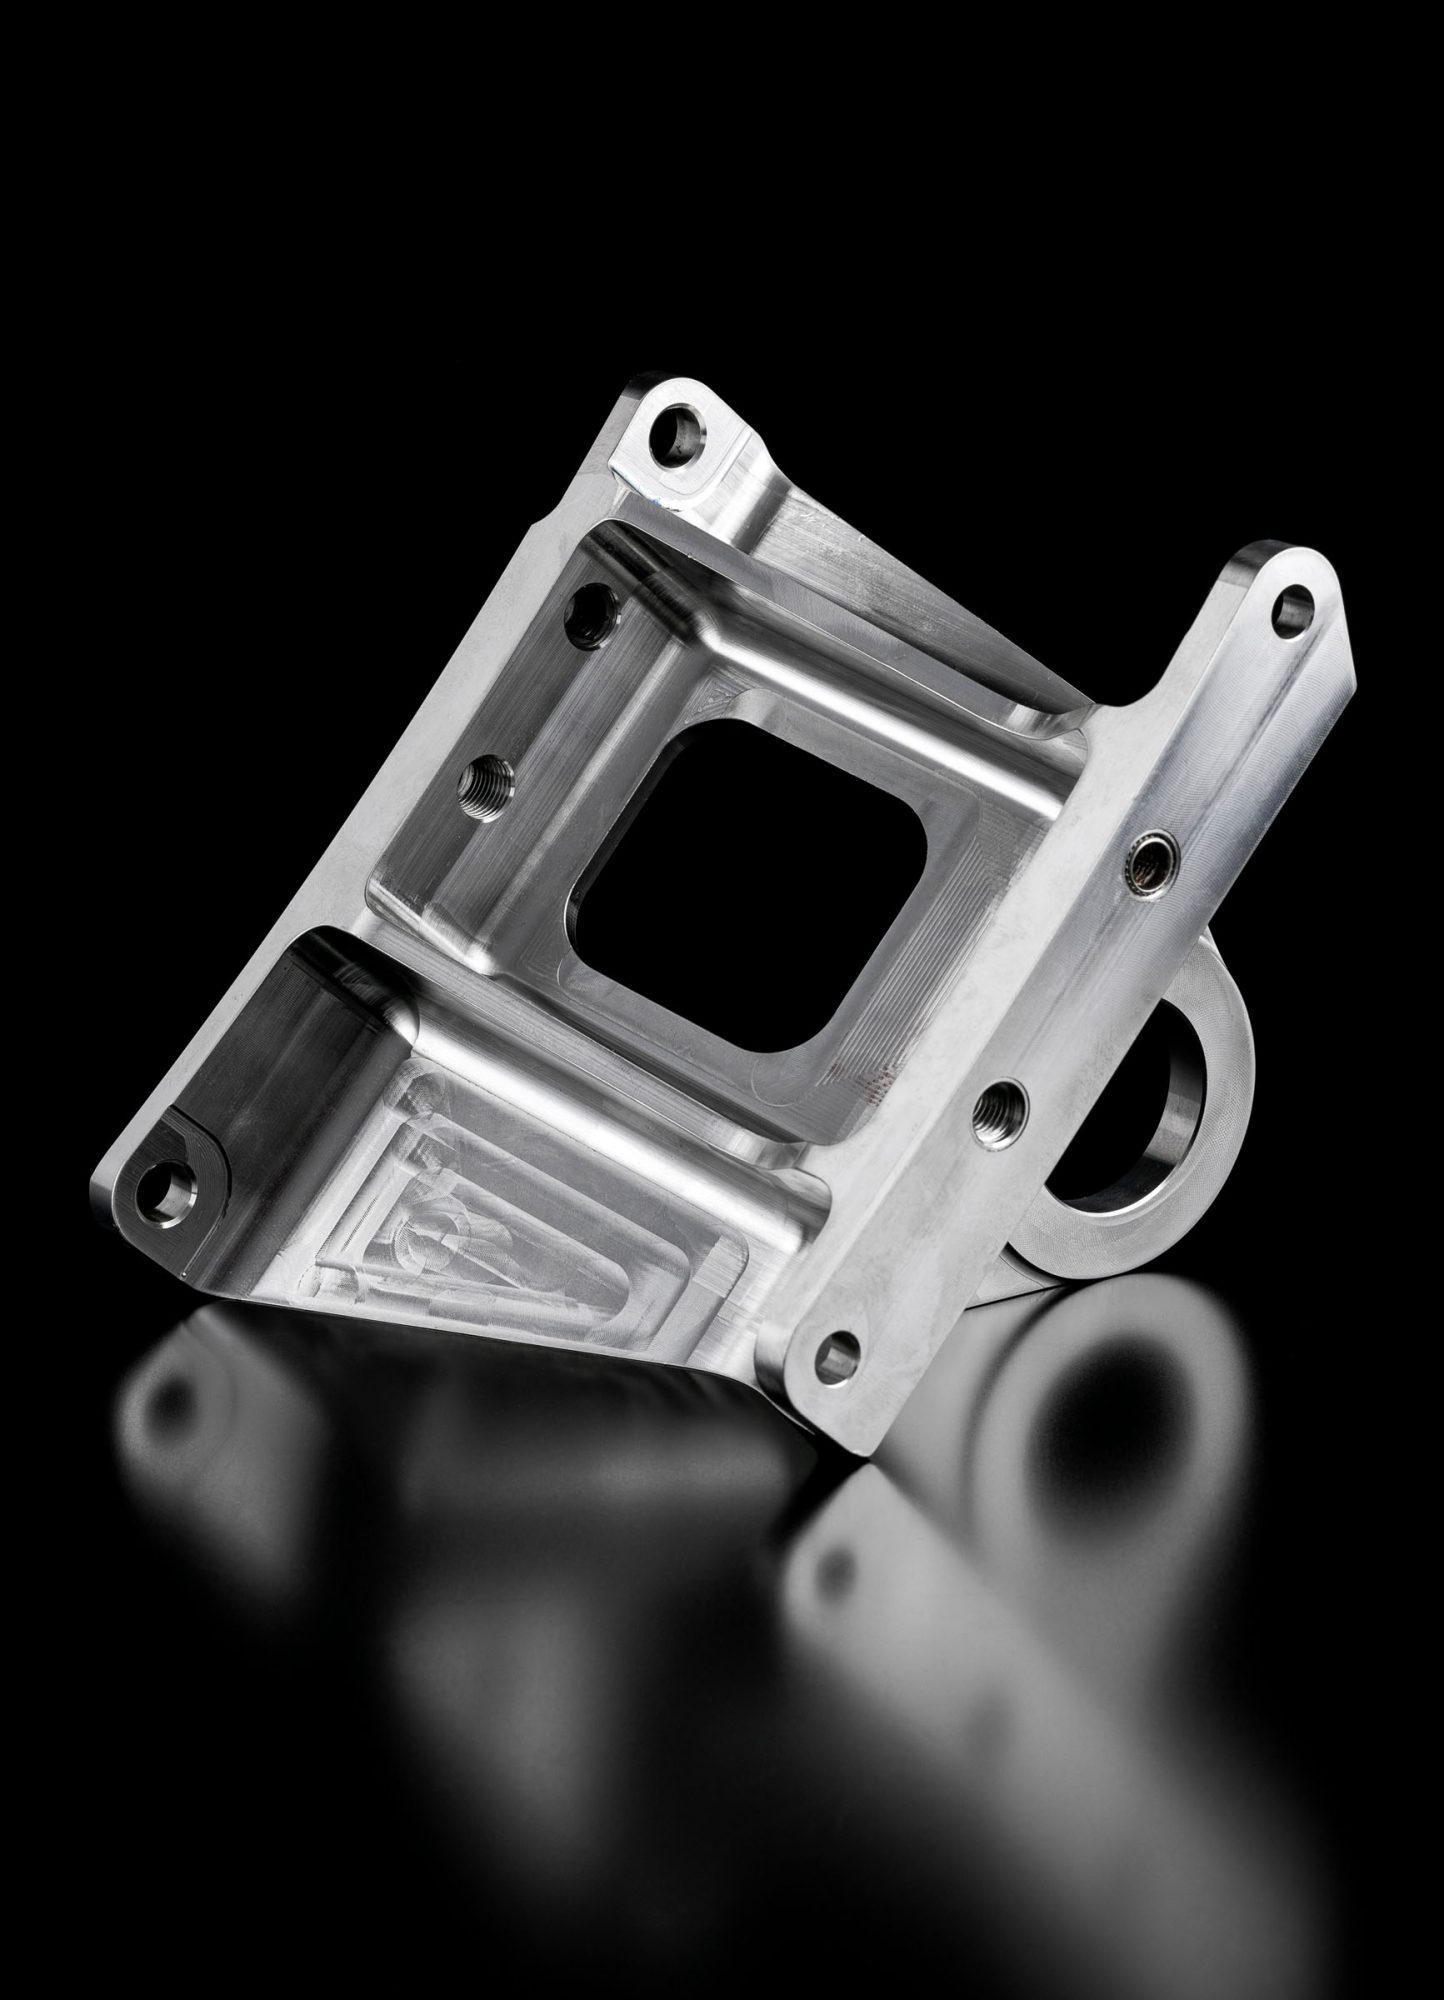 Bracket made from stainless steel for aerospace